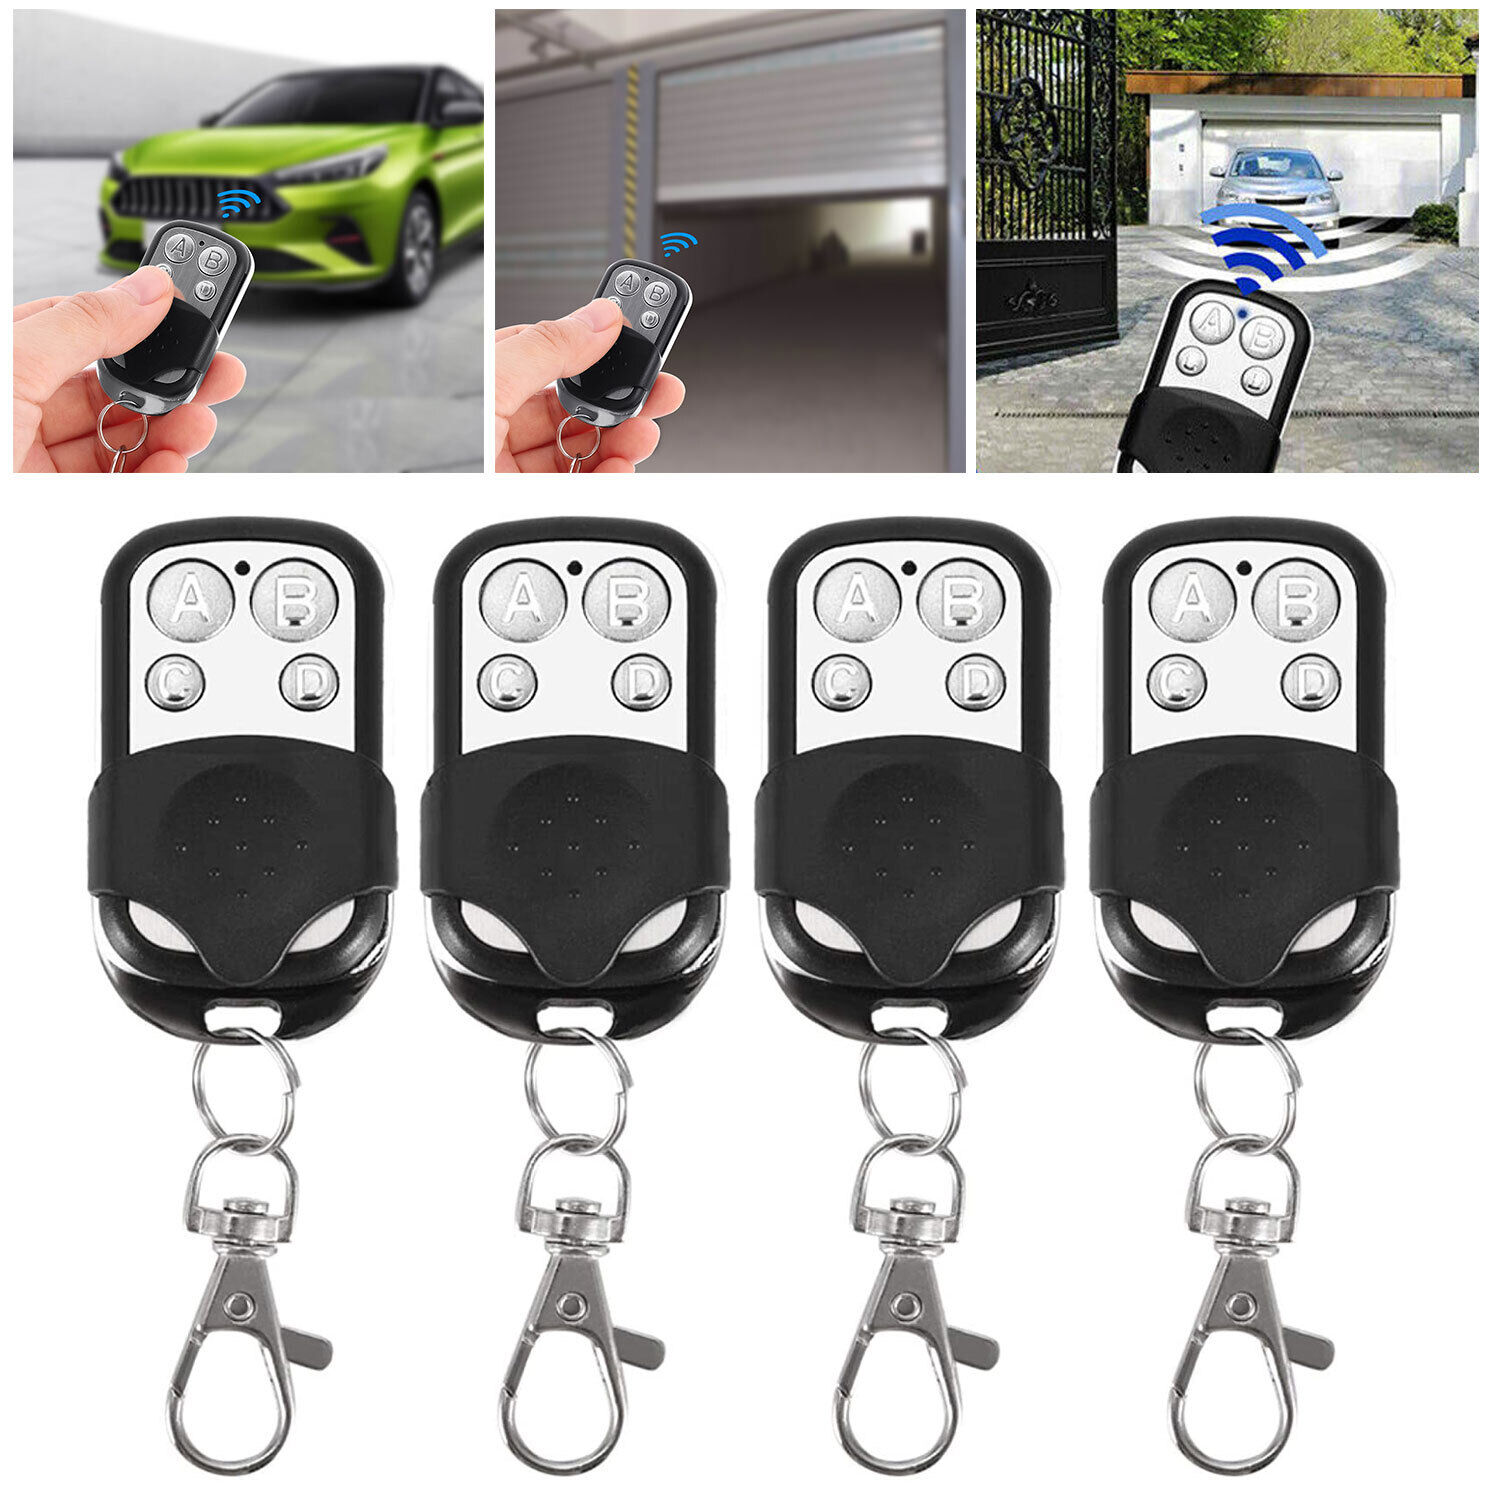 4x Universal Electric Cloning Remote Control Key Fob 433MHz For Gate Garage Door Unbranded Does Not Apply - фотография #2